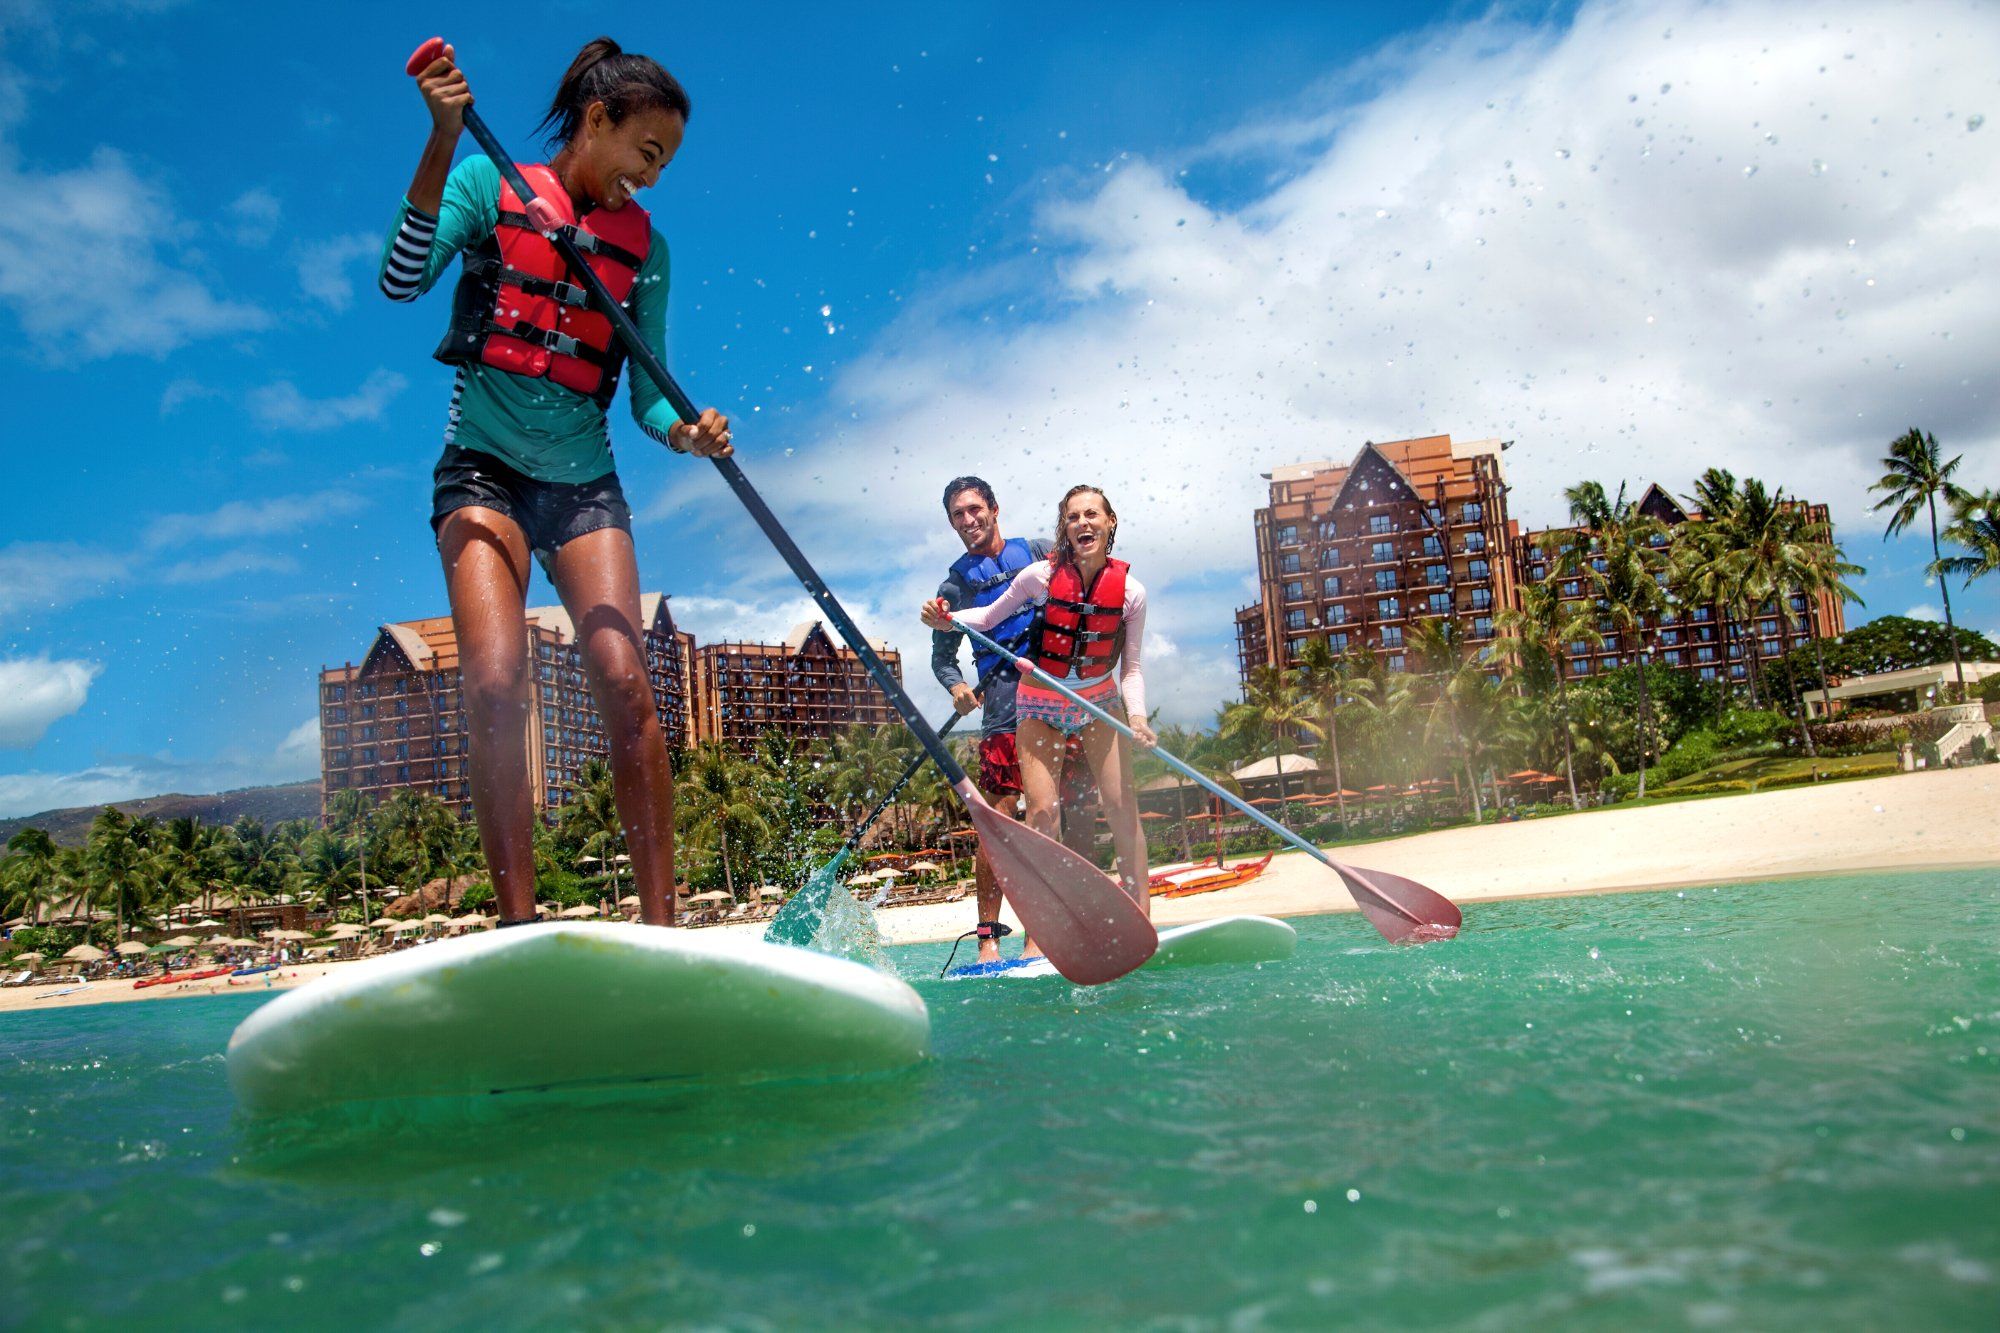 30 Best Family Vacations for Summer 2022 - Family-Friendly Resorts